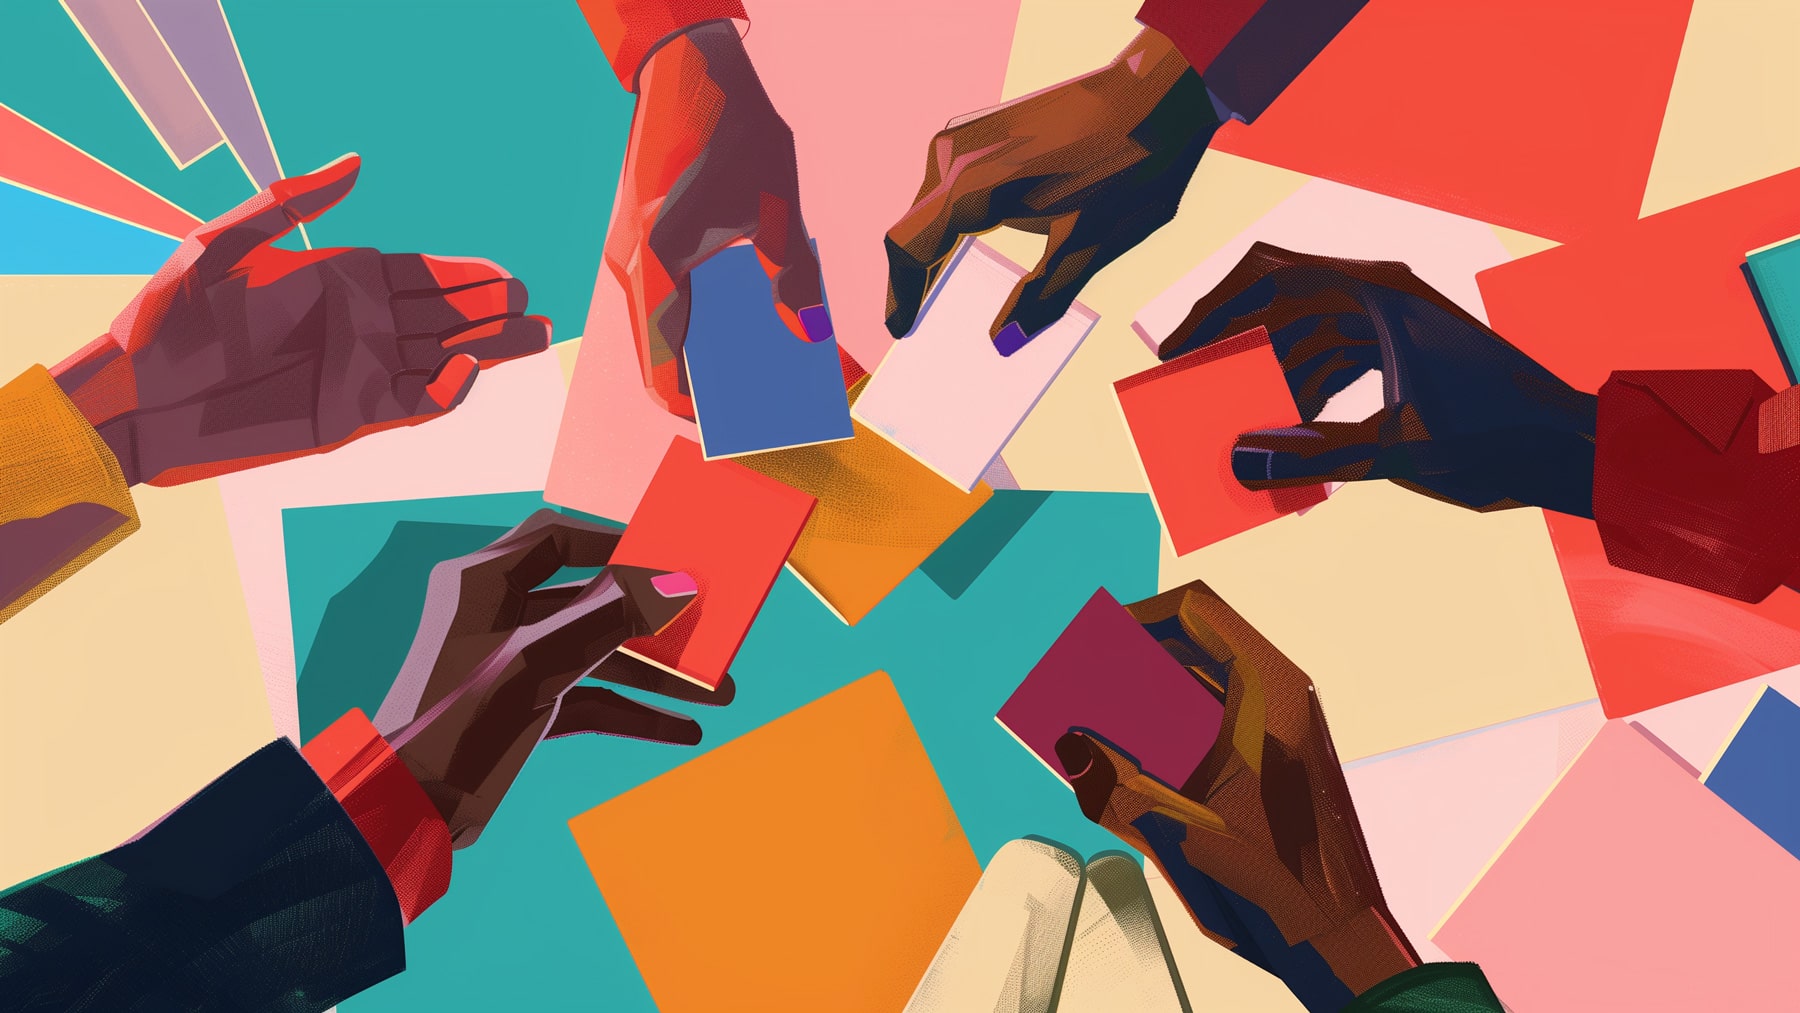 Abstract illustration of hands exchanging colorful business cards, highlighting the importance of business cards in professional networking.